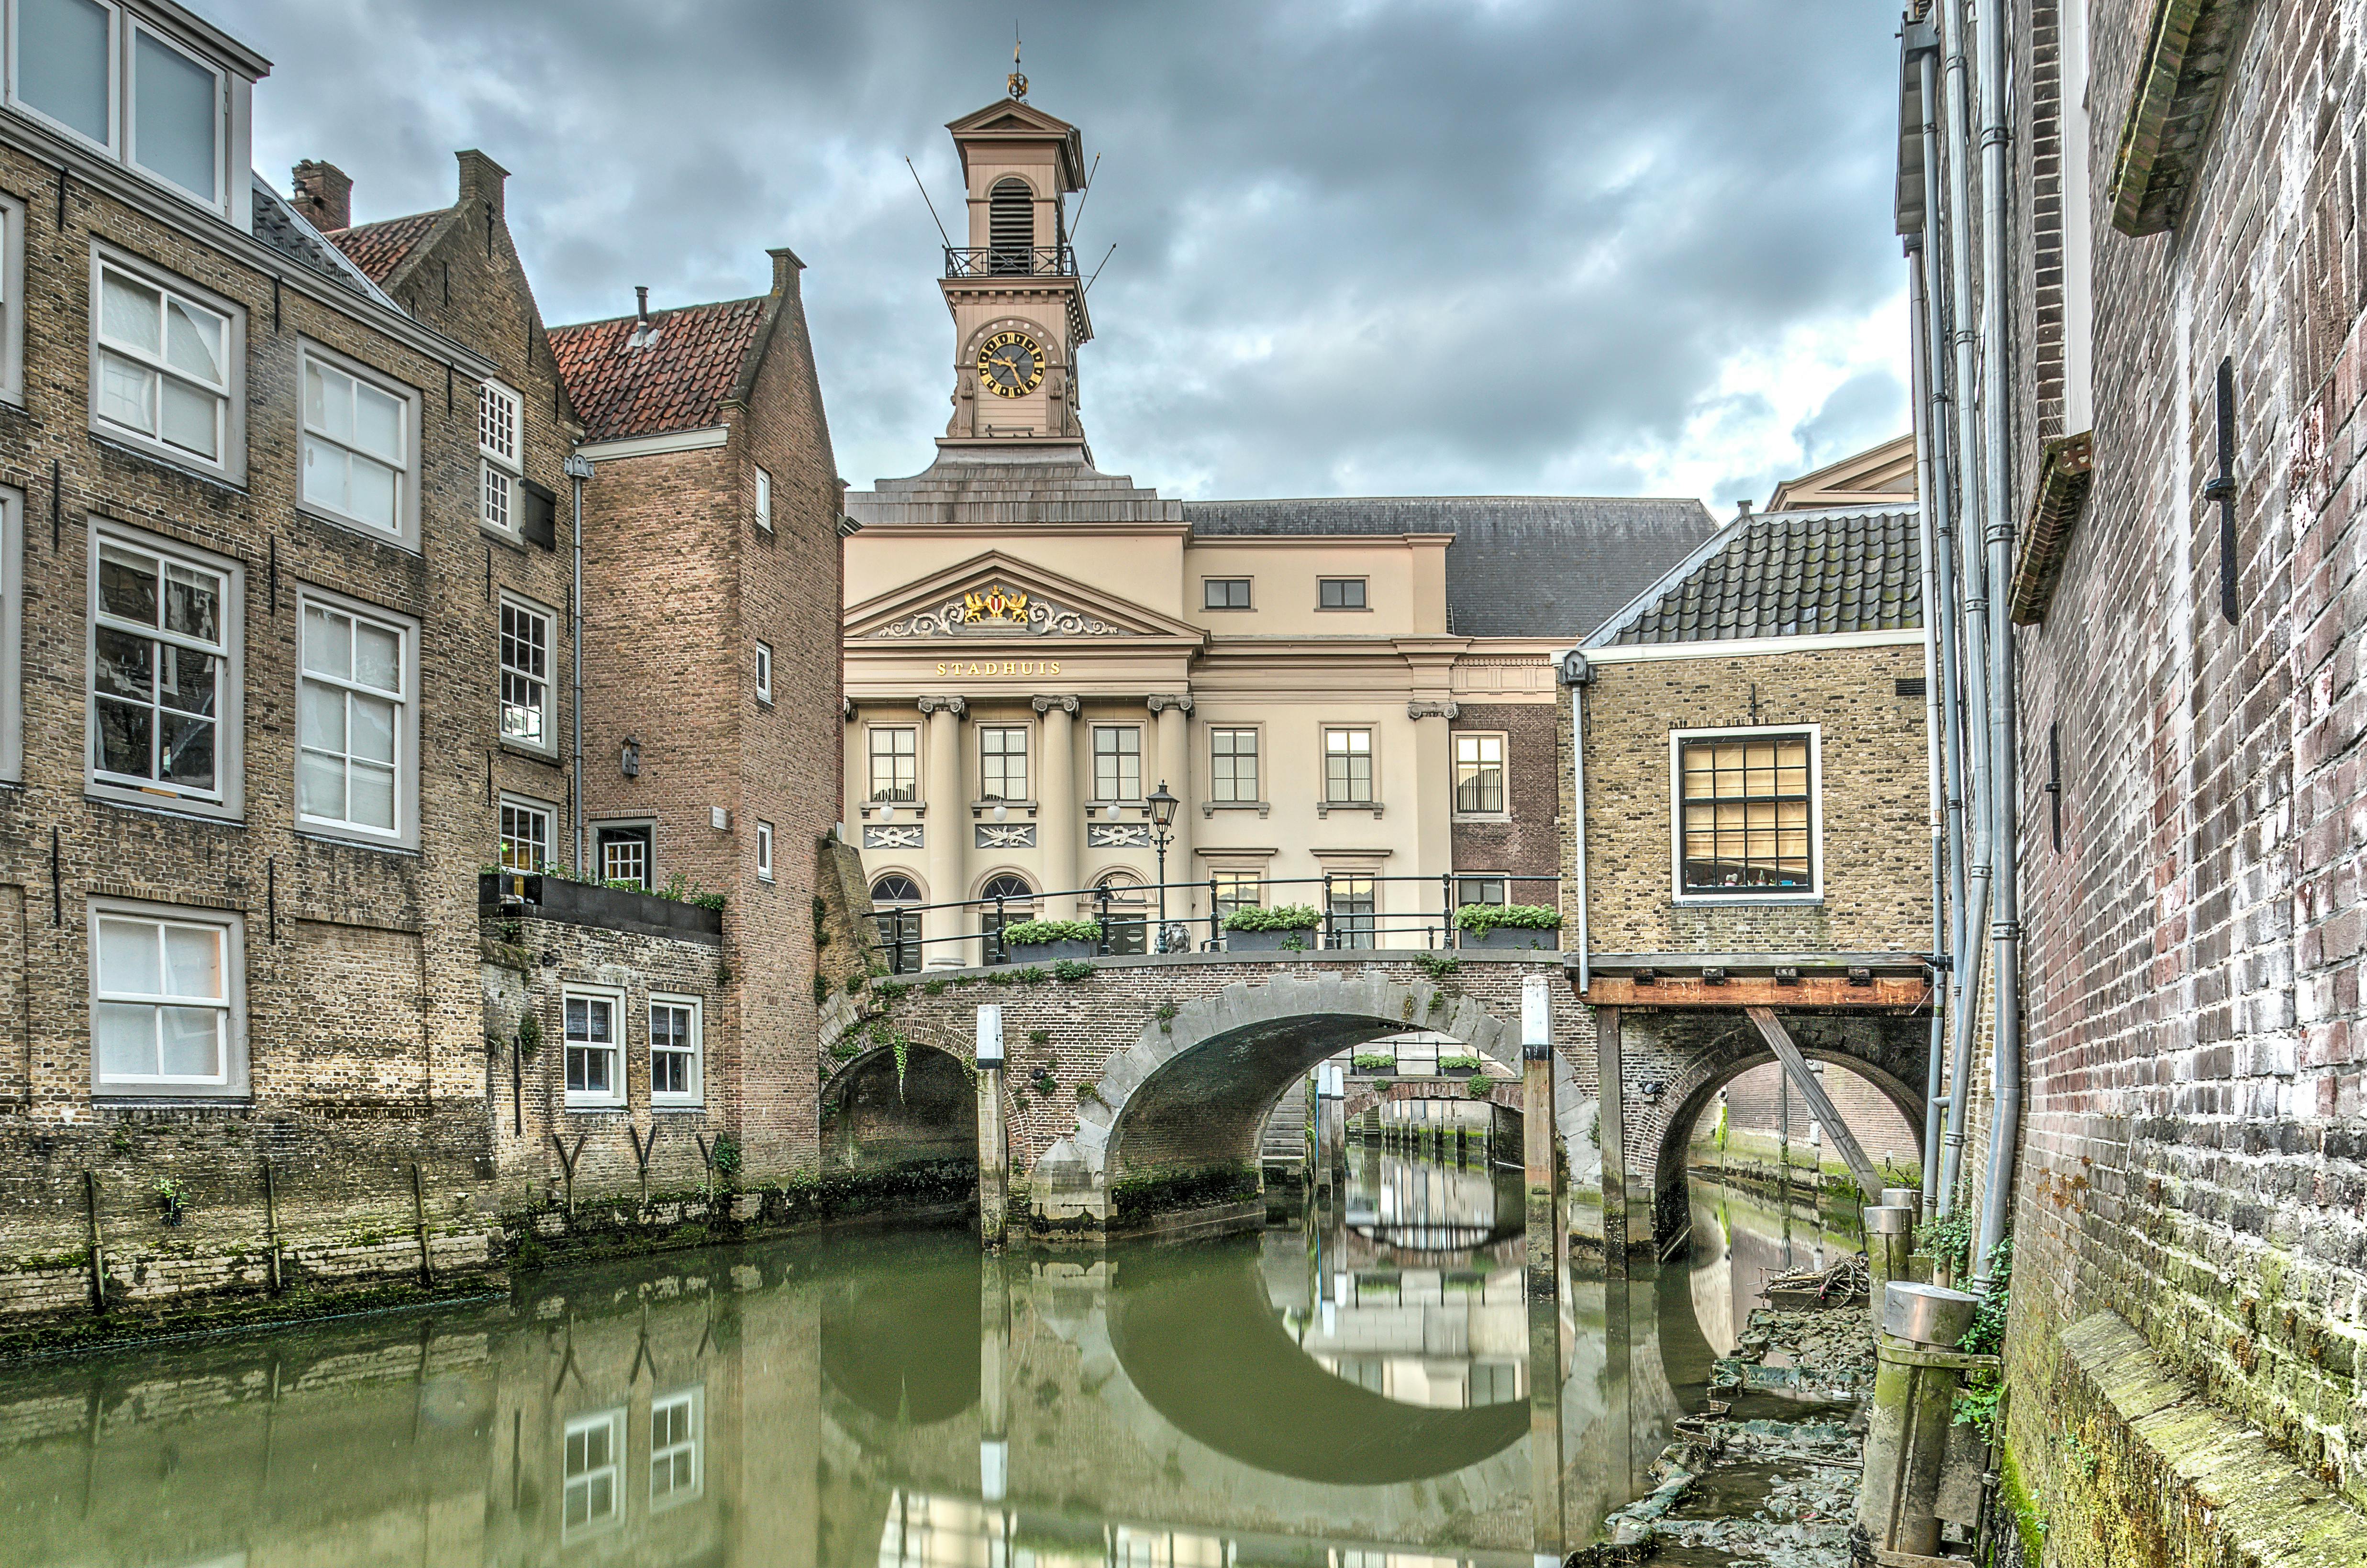 Self guided tour with interactive city game of Dordrecht